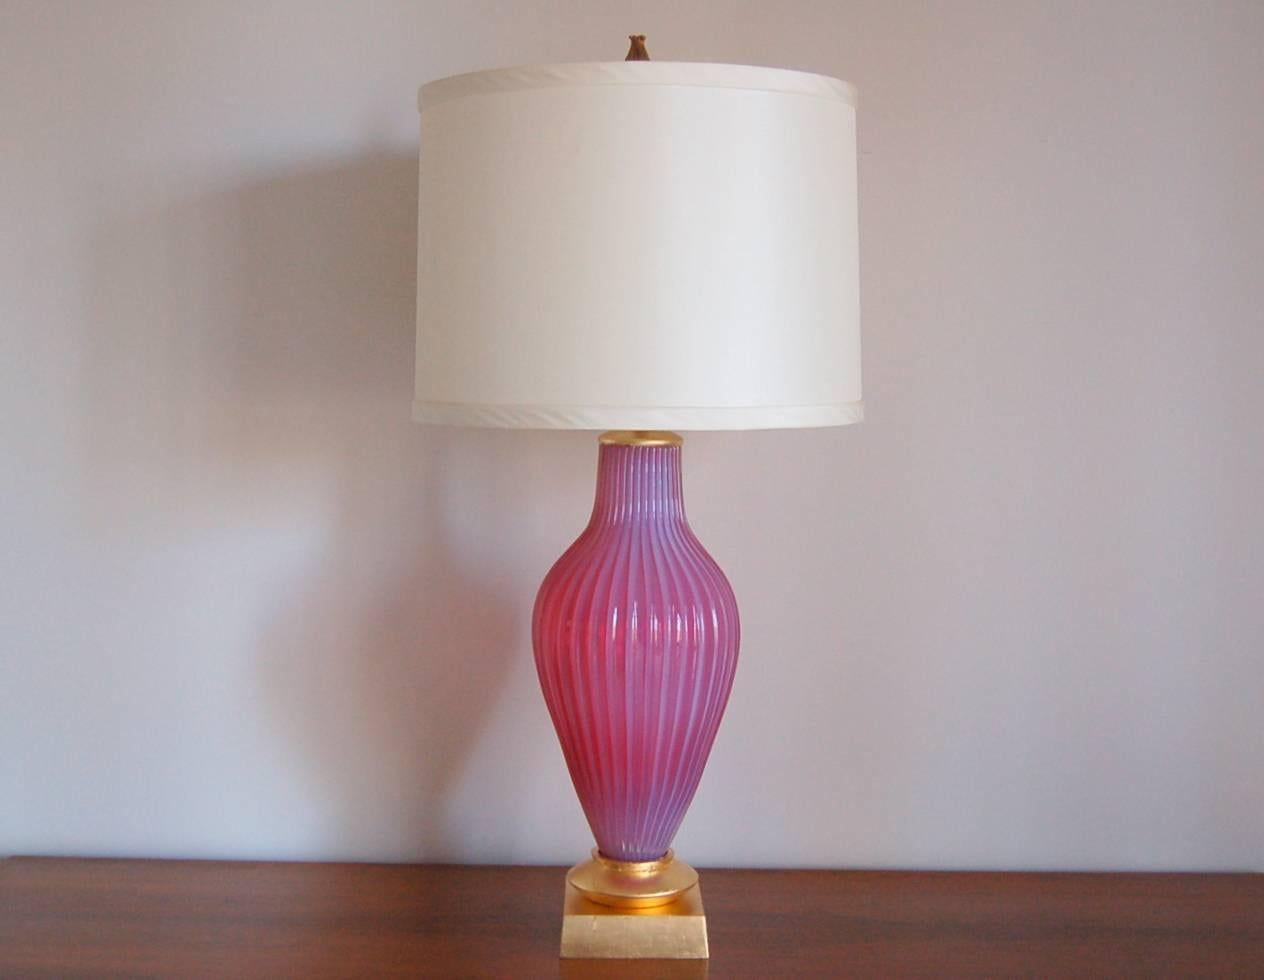 Perfectly matched pair of vintage Murano table lamps by Seguso for Marbro. Exquisite Murano opaline lamps in RASPBERRY PINK by The Marbro lamp company on glamorous Gold leafed bases. An enormous pop of candy color that glows in natural light,